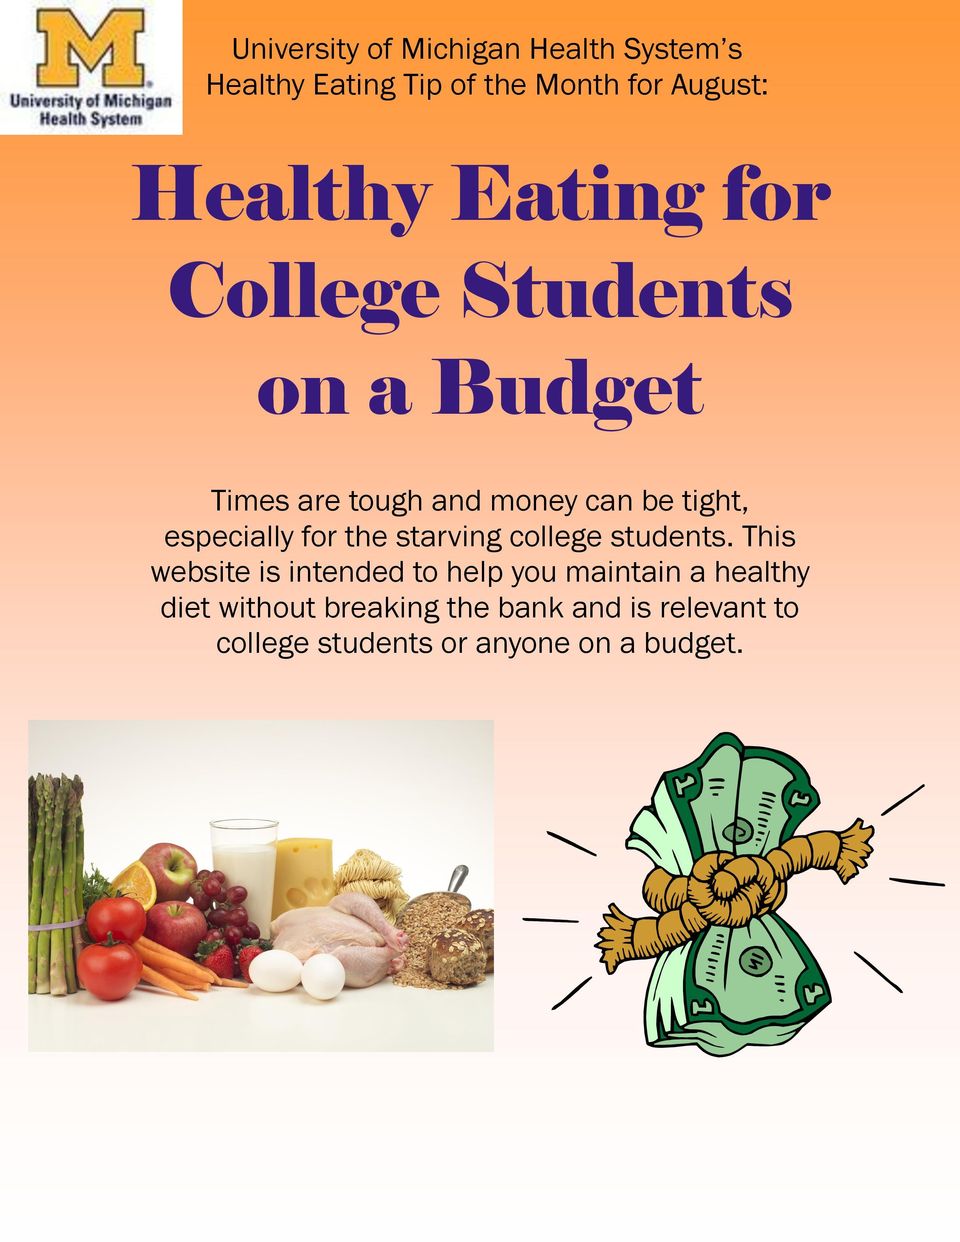 for the starving college students.